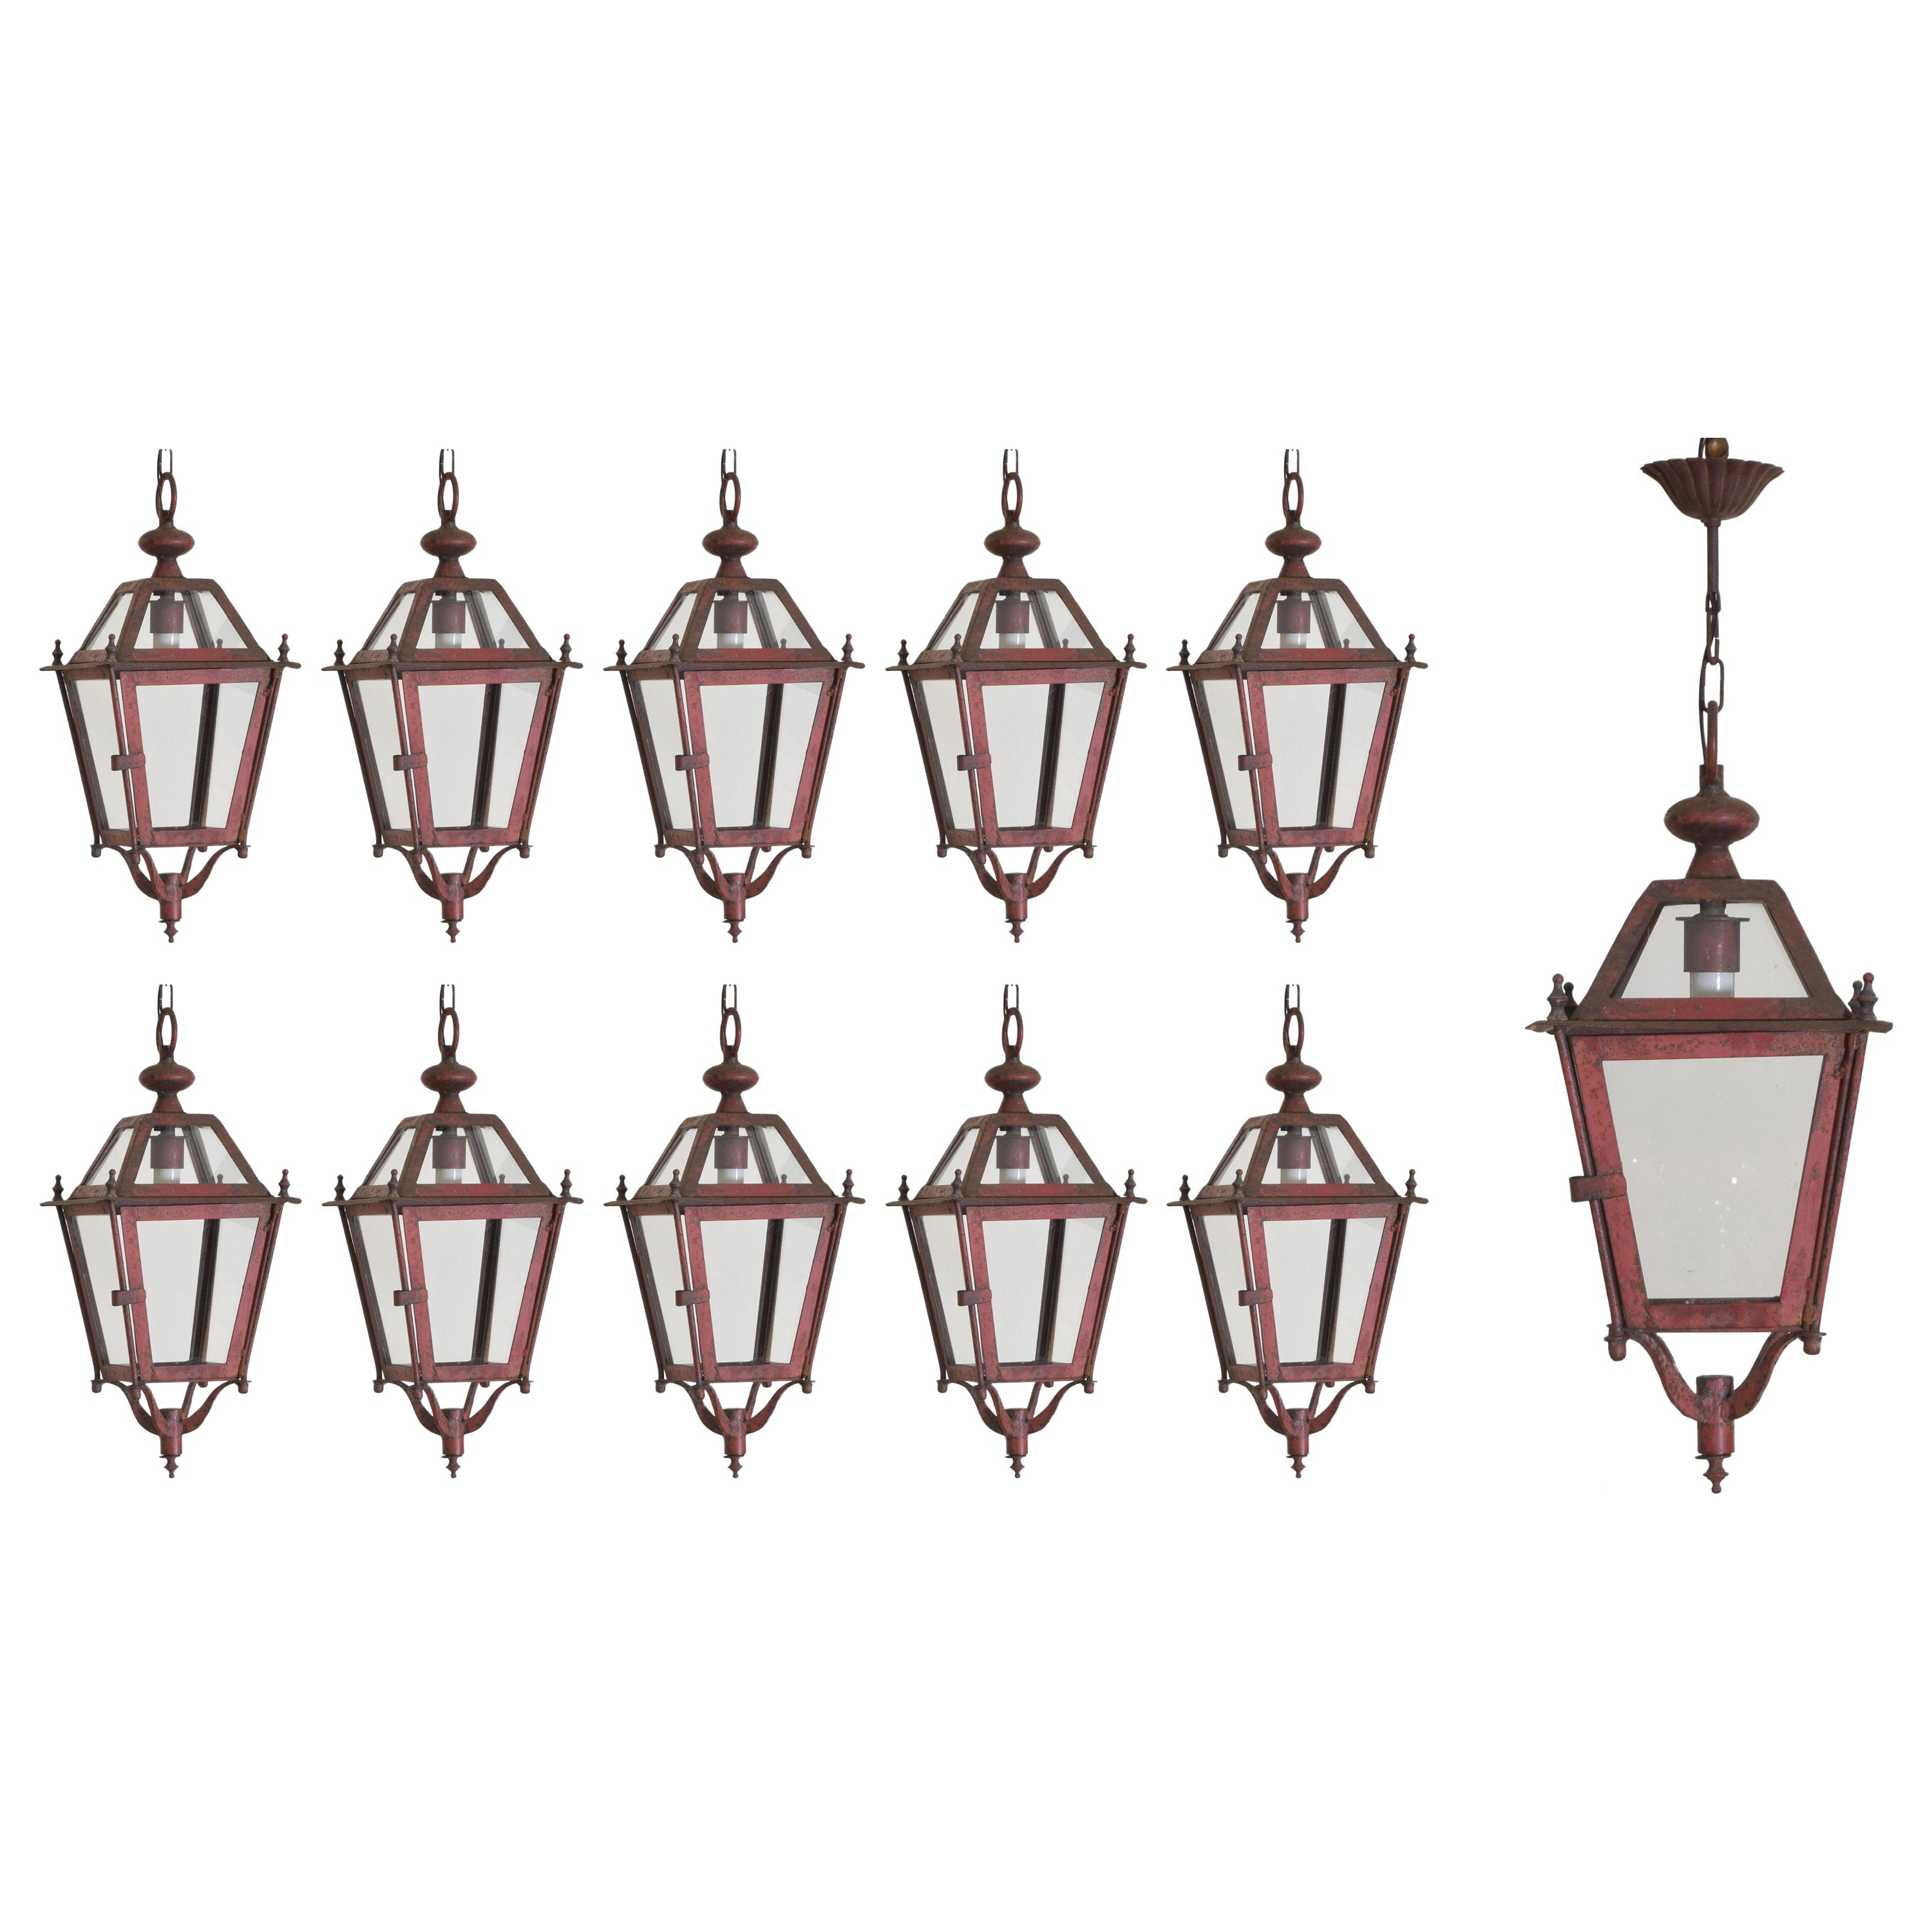 Early 20th Century Italian Red Painted Iron Lanterns (5 available)